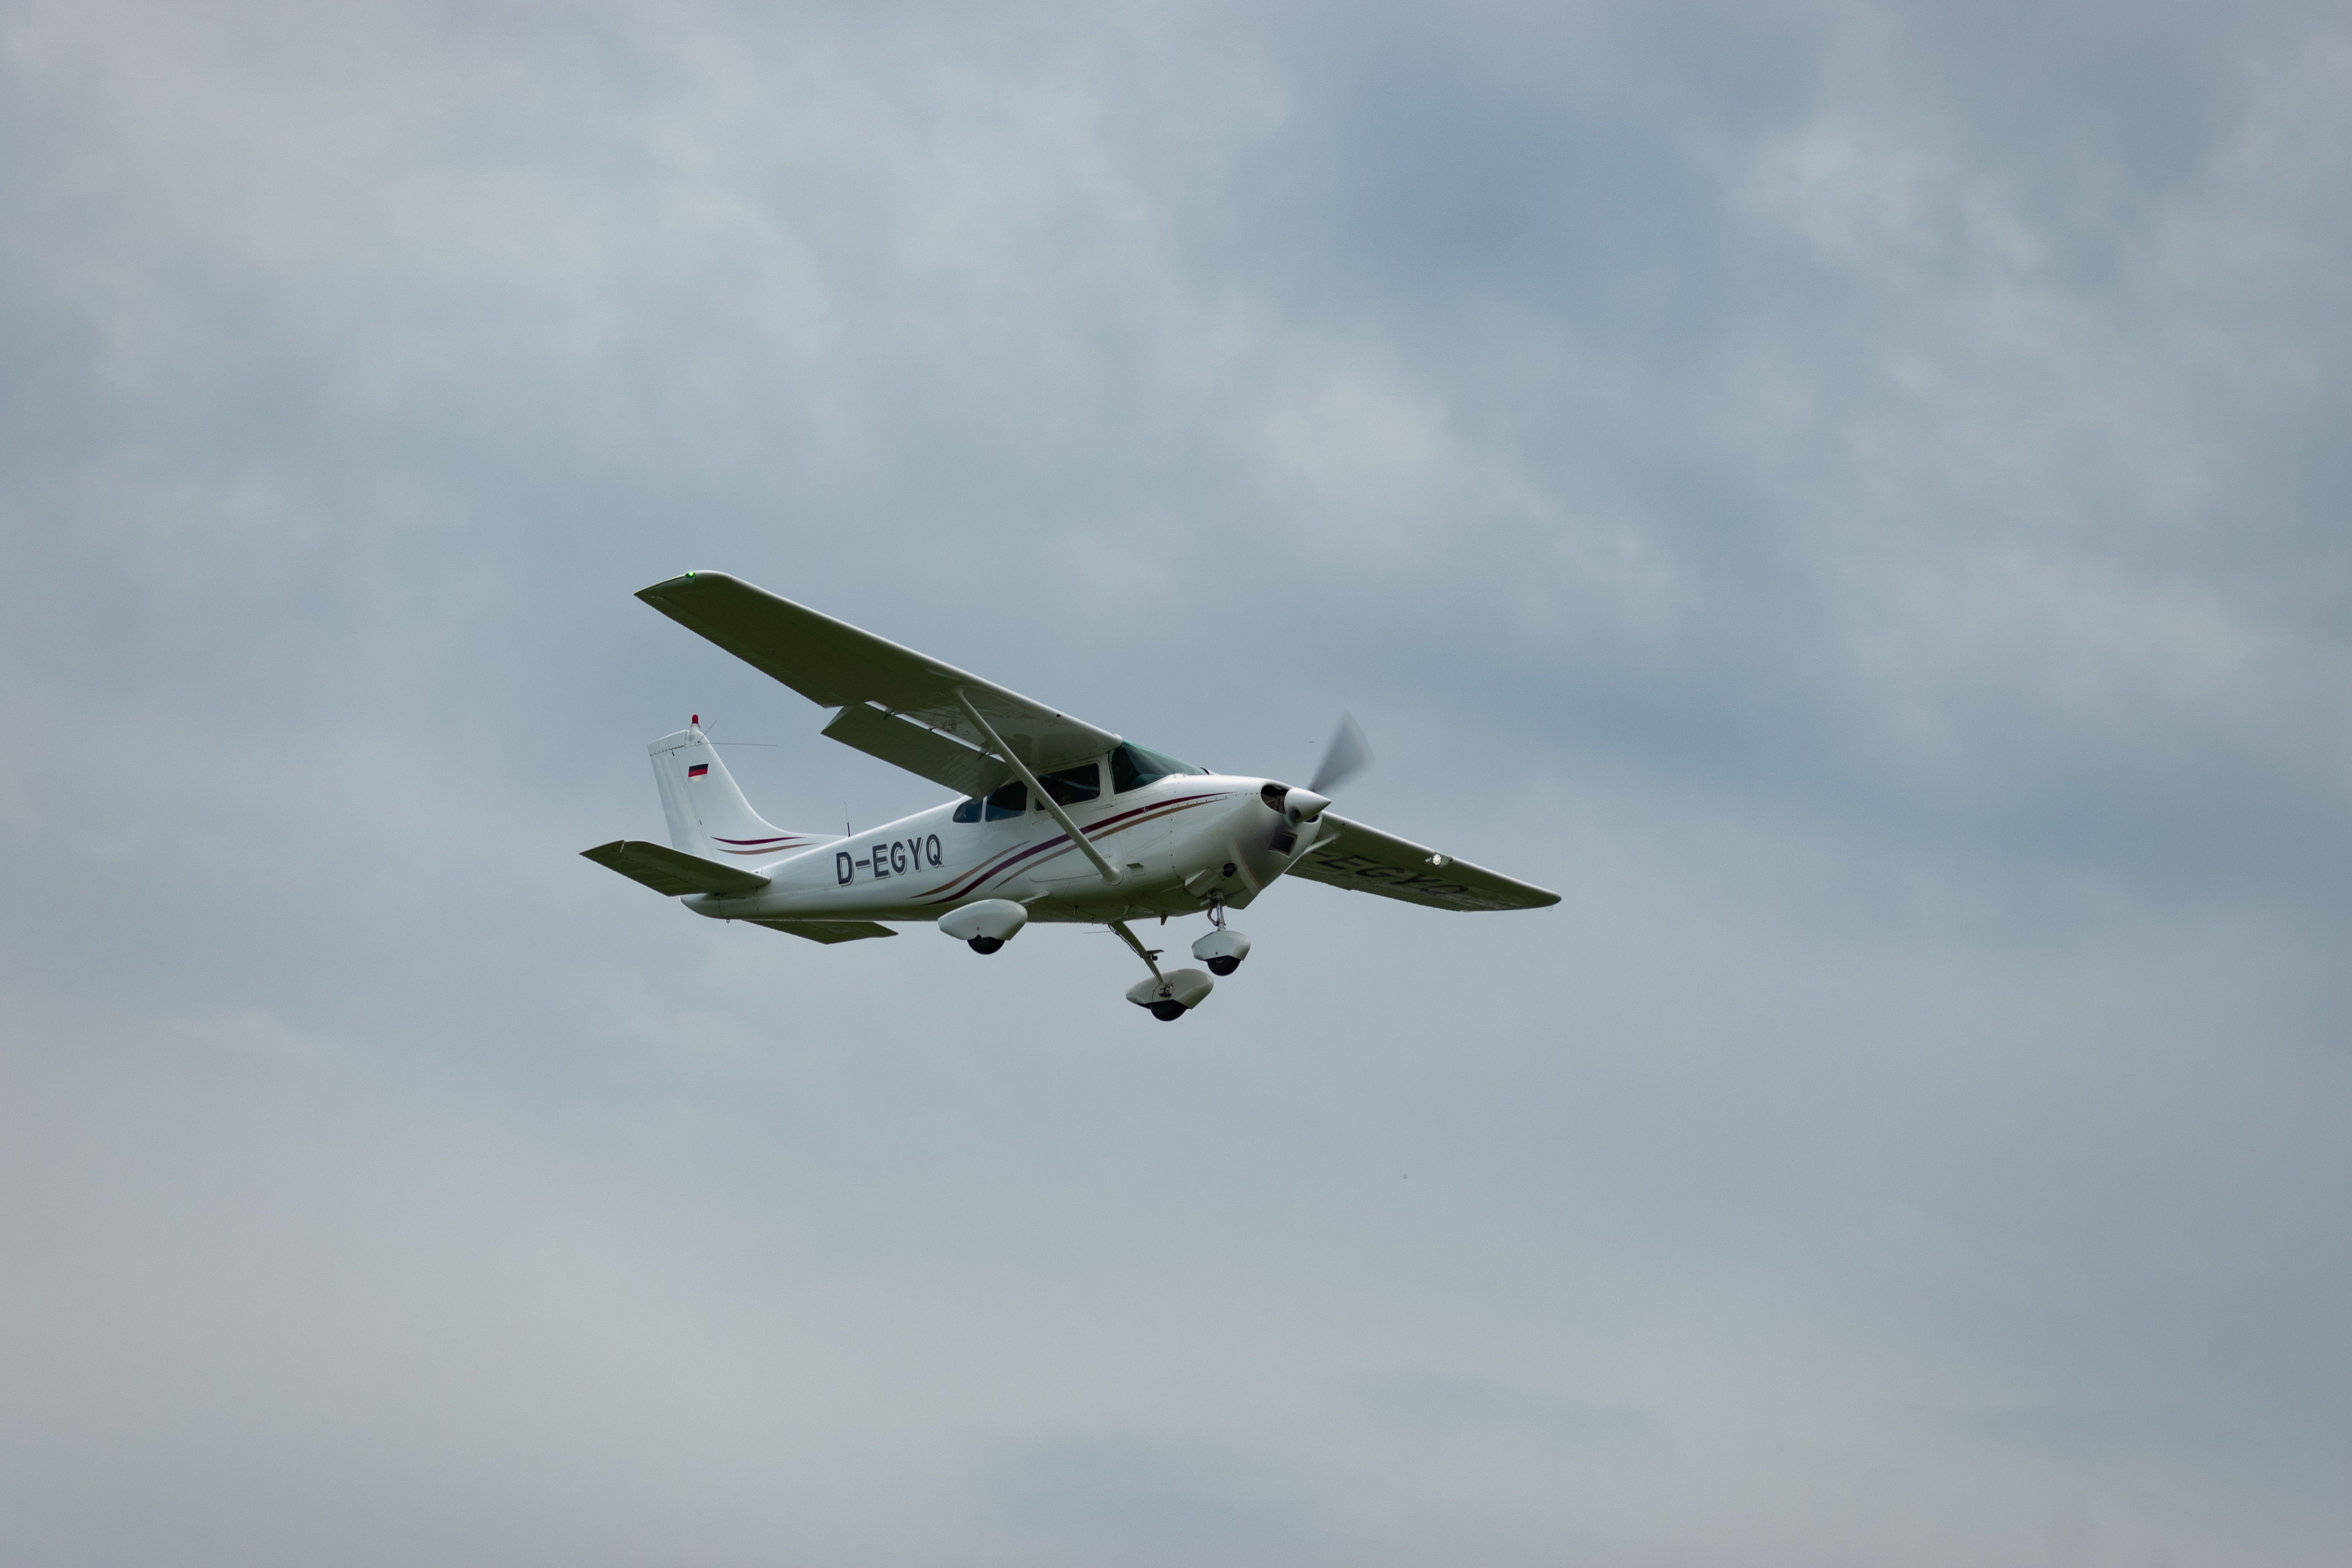 A Cessna 182 flying in the sky.